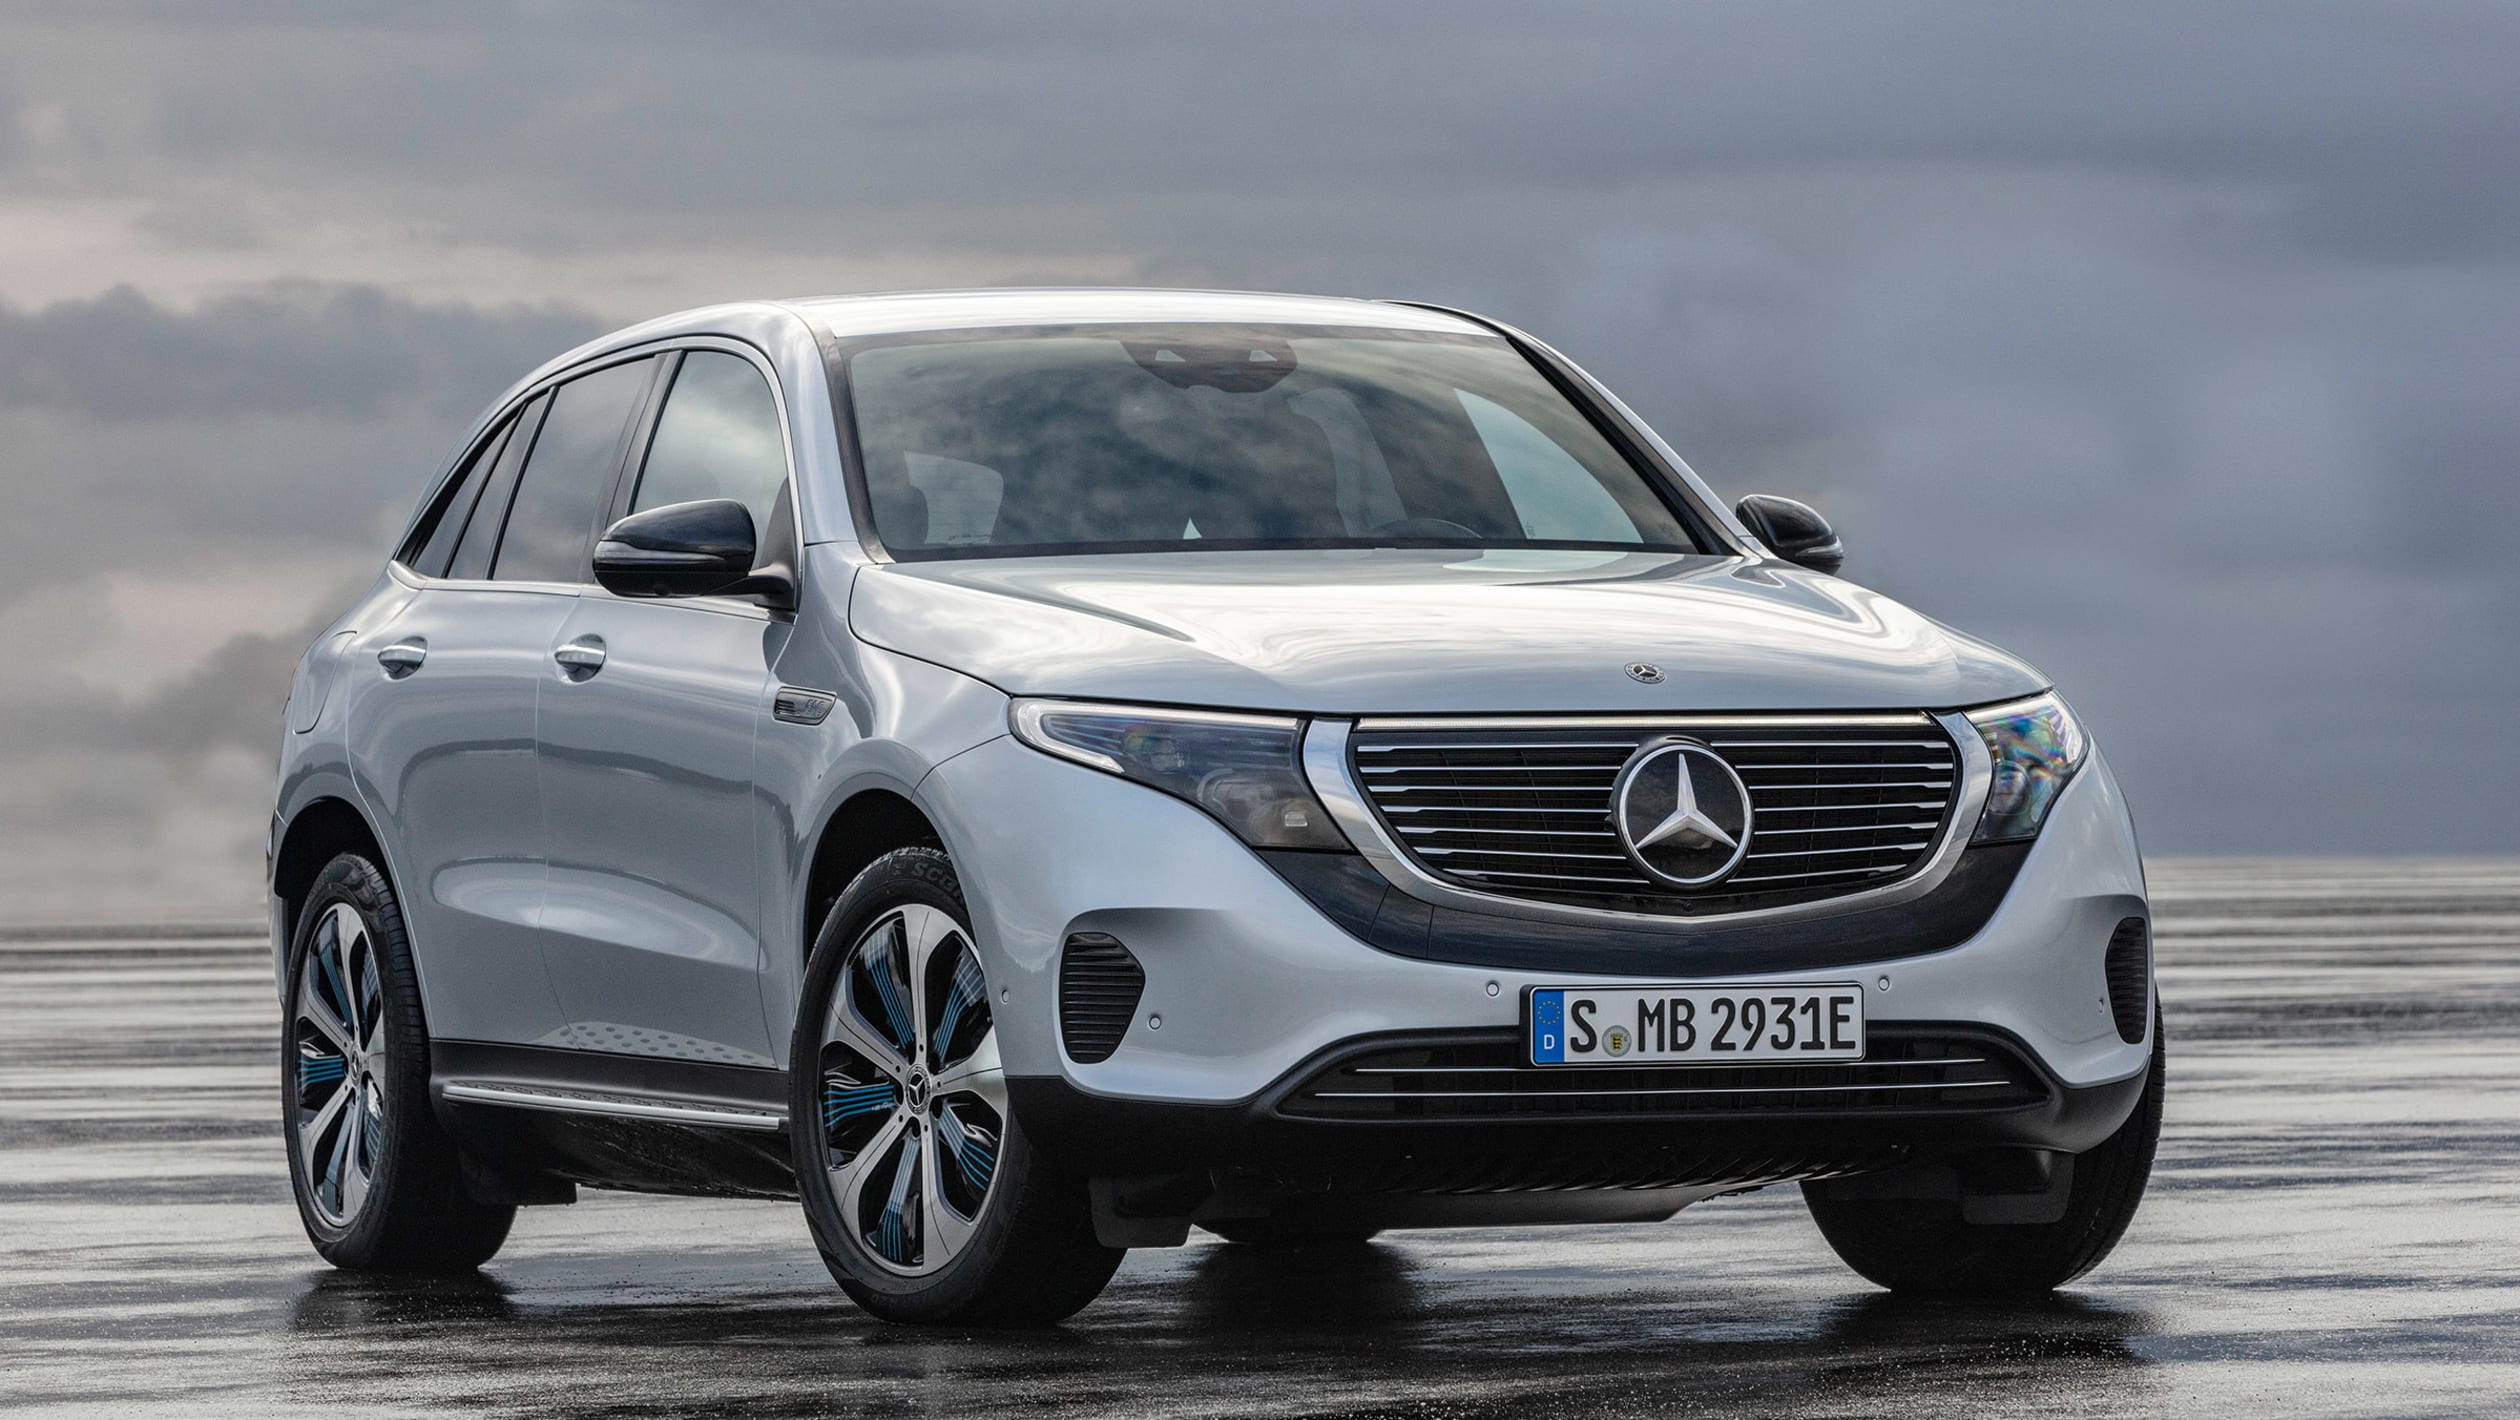 New electric Mercedes EQC SUV revealed with 259mile range pictures